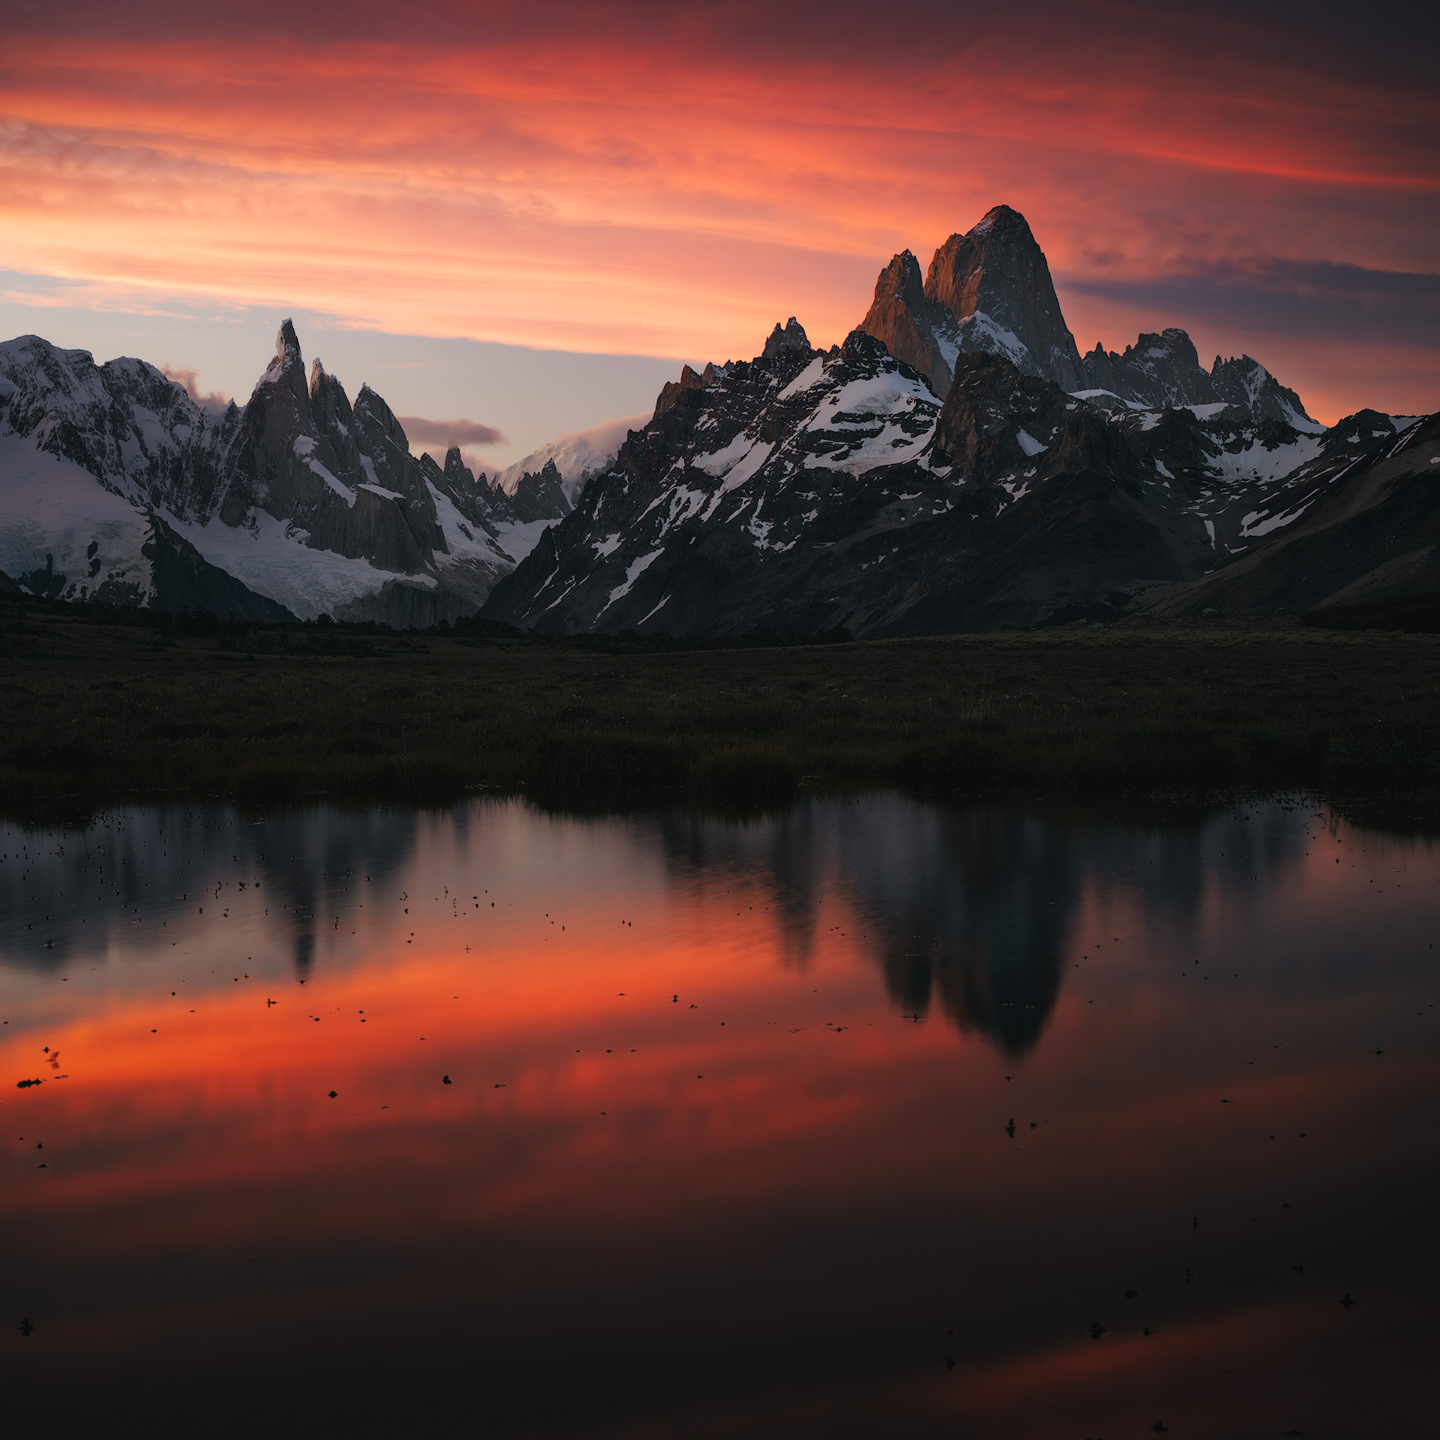 Cerro Torre and Fitz Roy reflected in a pond.